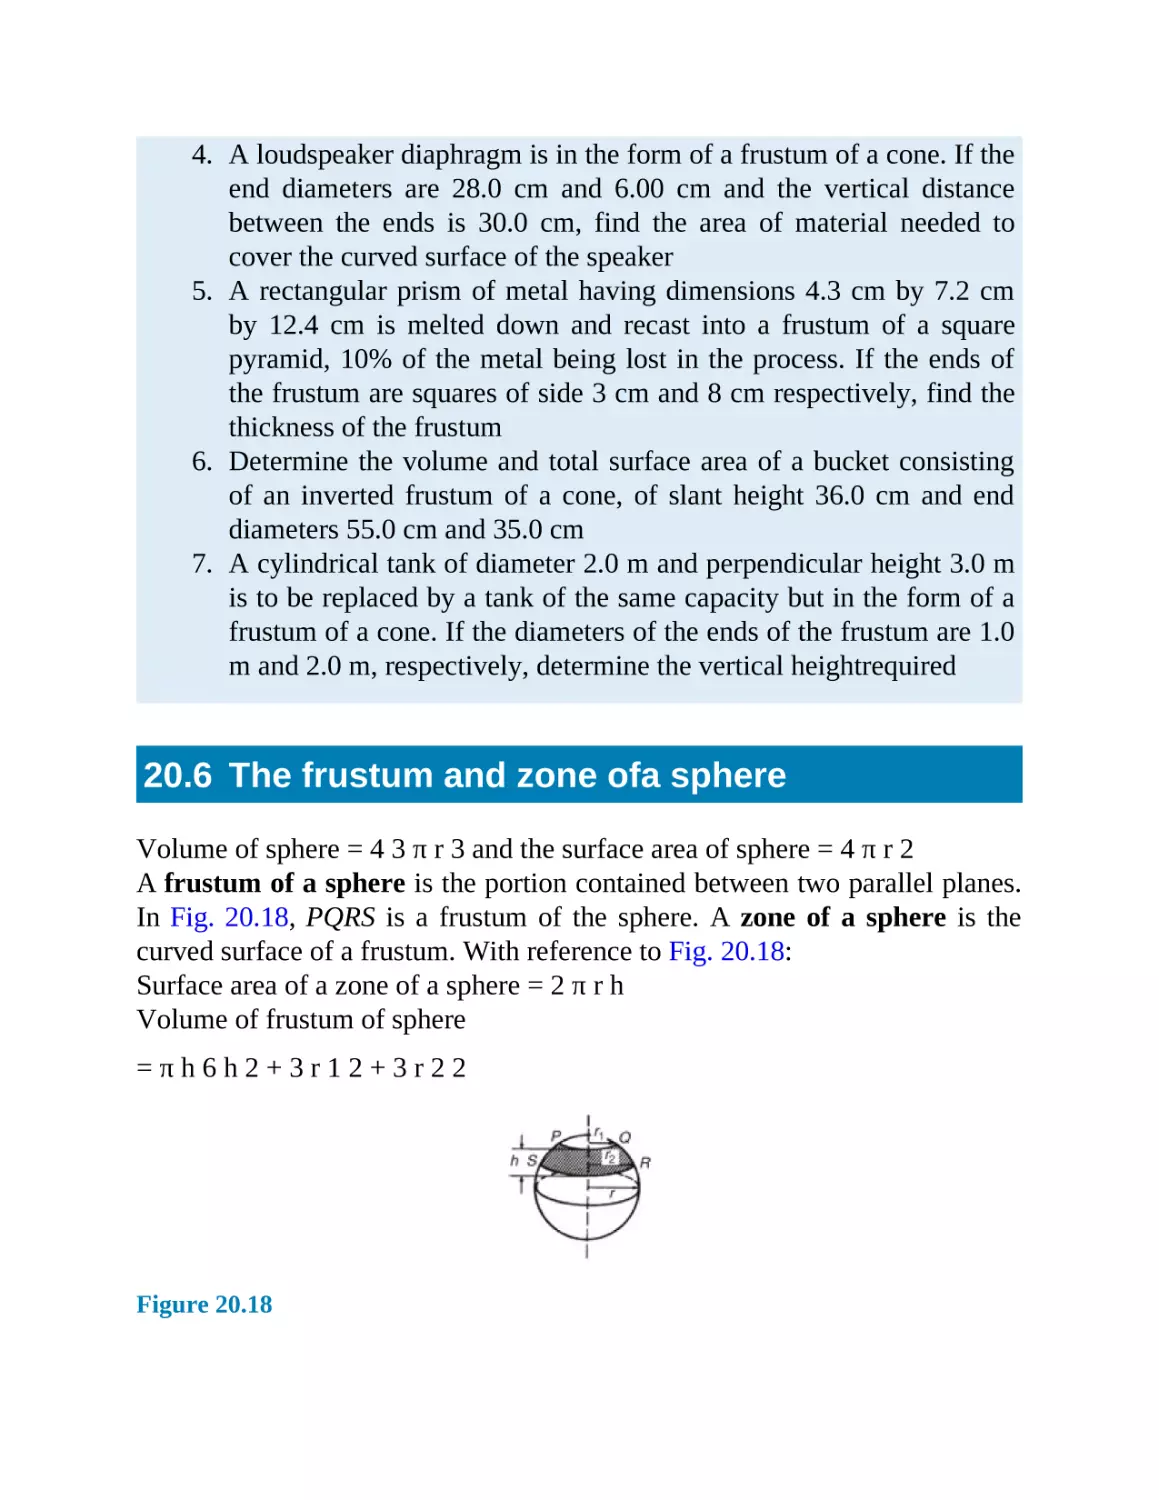 20.6 The frustum and zone ofa sphere